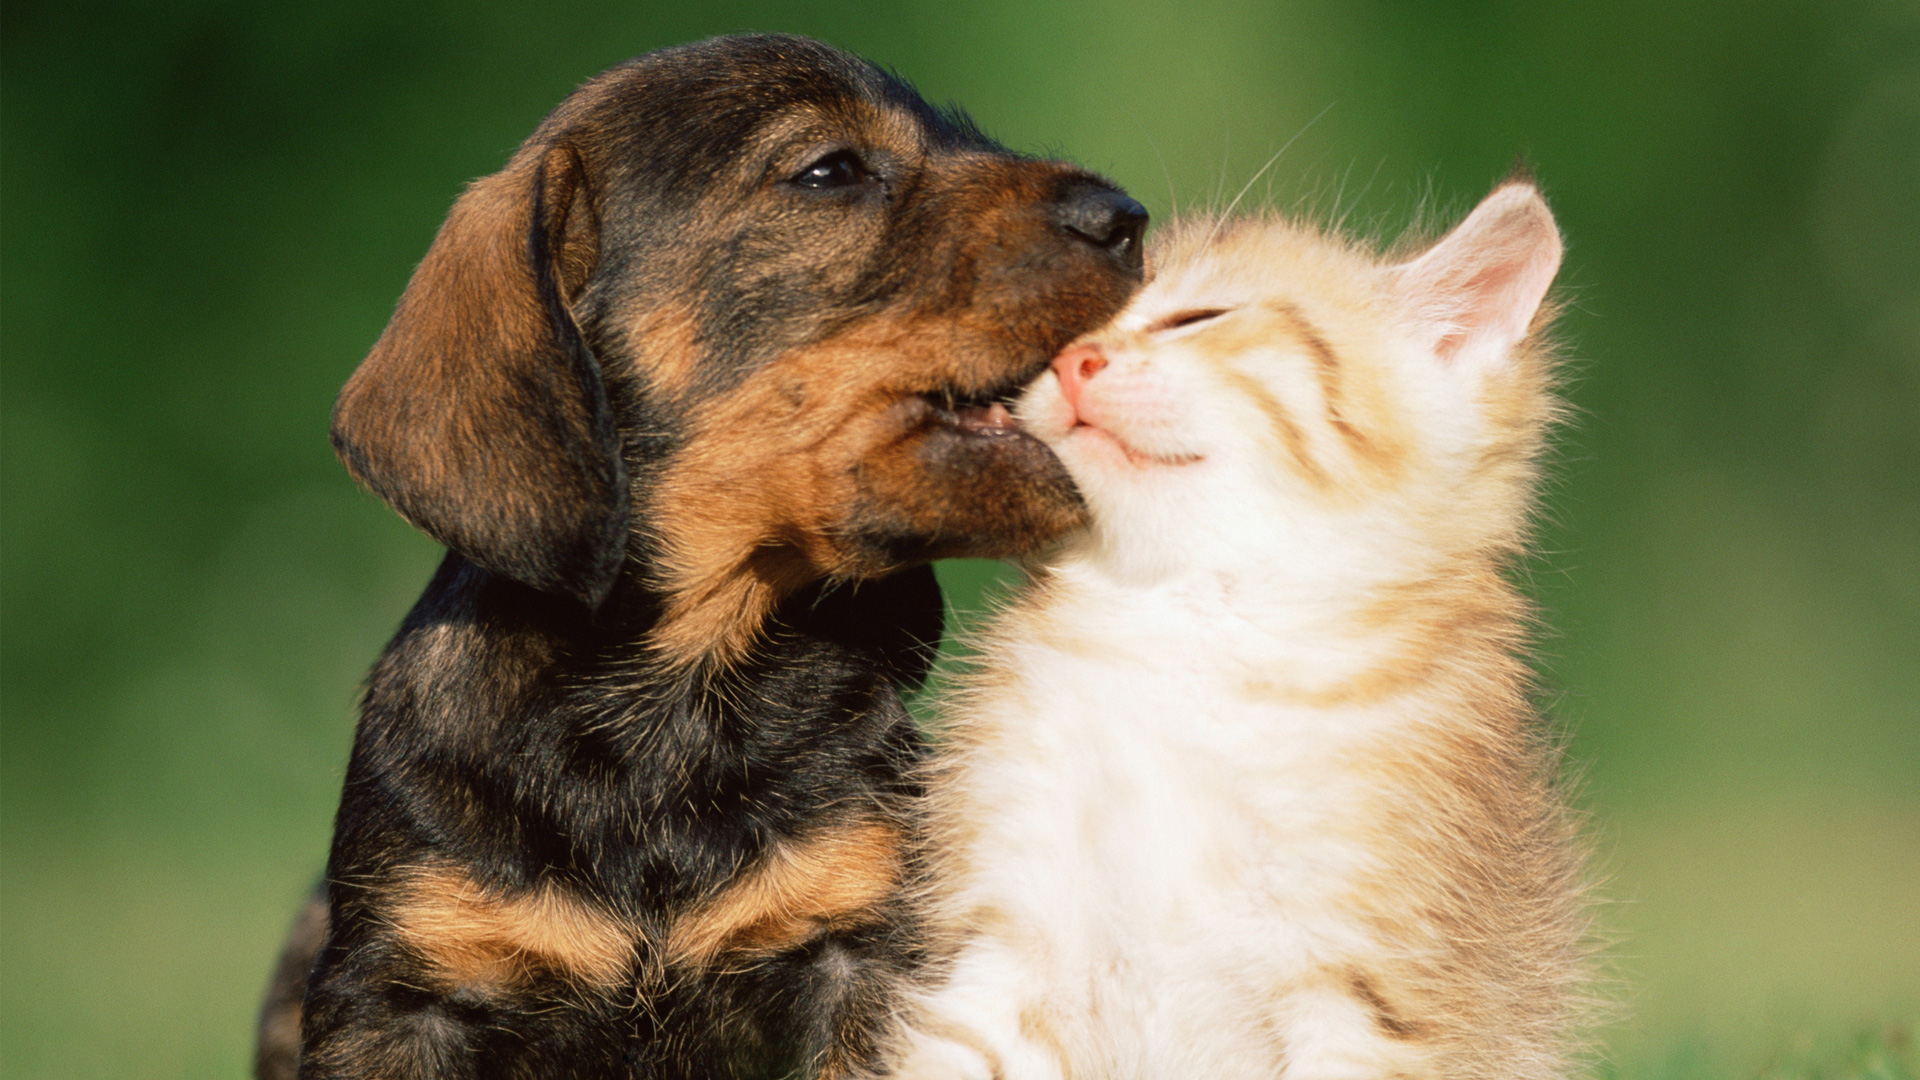 Pics Of Puppies And Kittens For Your Pc – Most Romantic Images